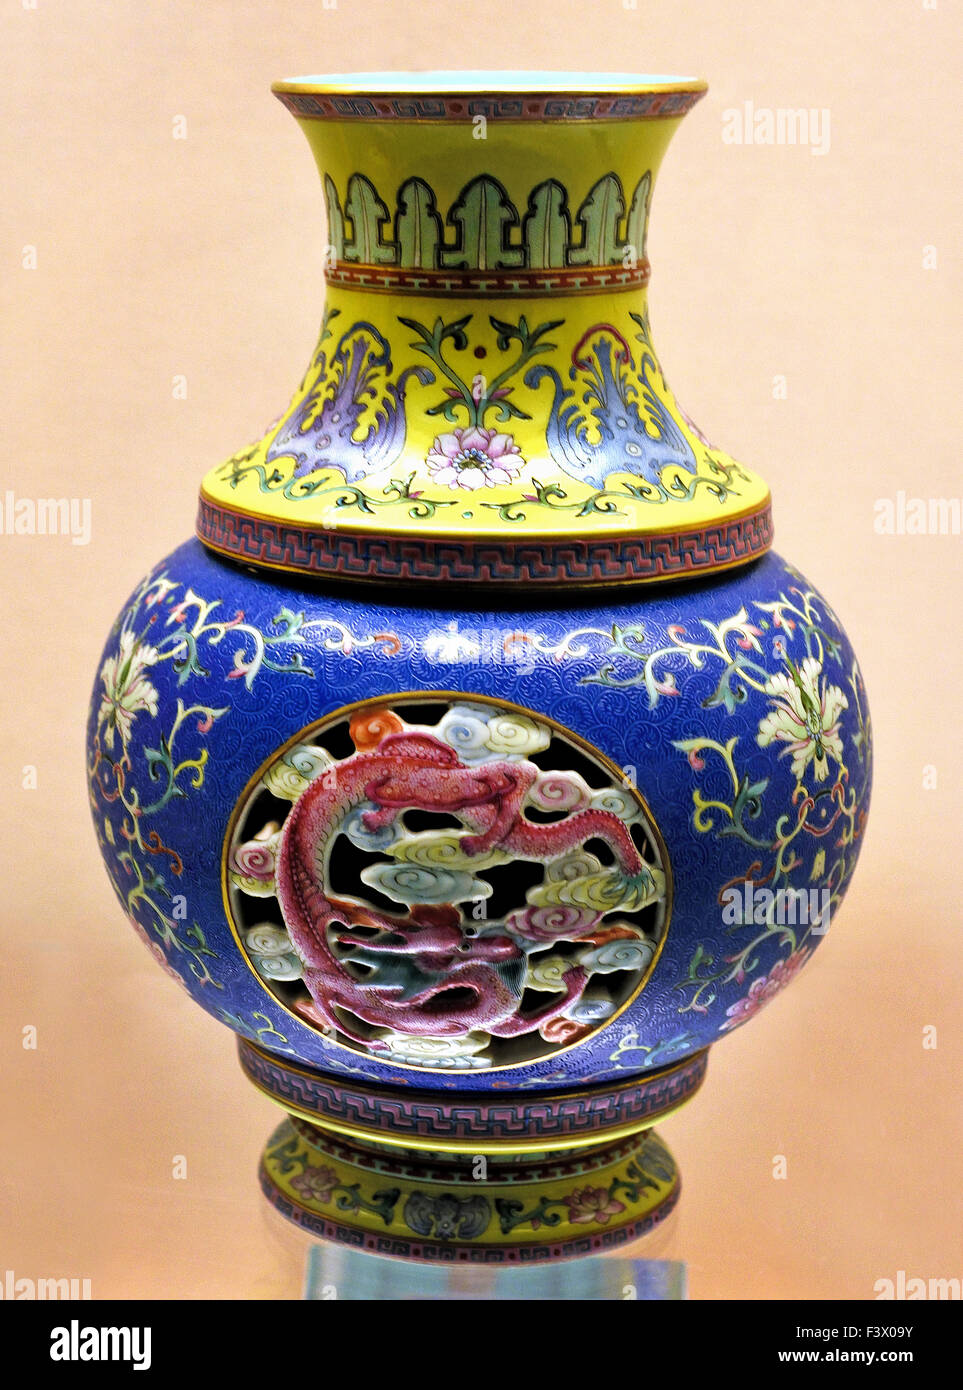 Revolving openwork vase with Fencai Design Jingdezhen Ware Qianlong  Reign ( 1736  - 1795  AD ) Qing Dynasty  Shanghai Museum of ancient  ancient Chinese art China Stock Photo